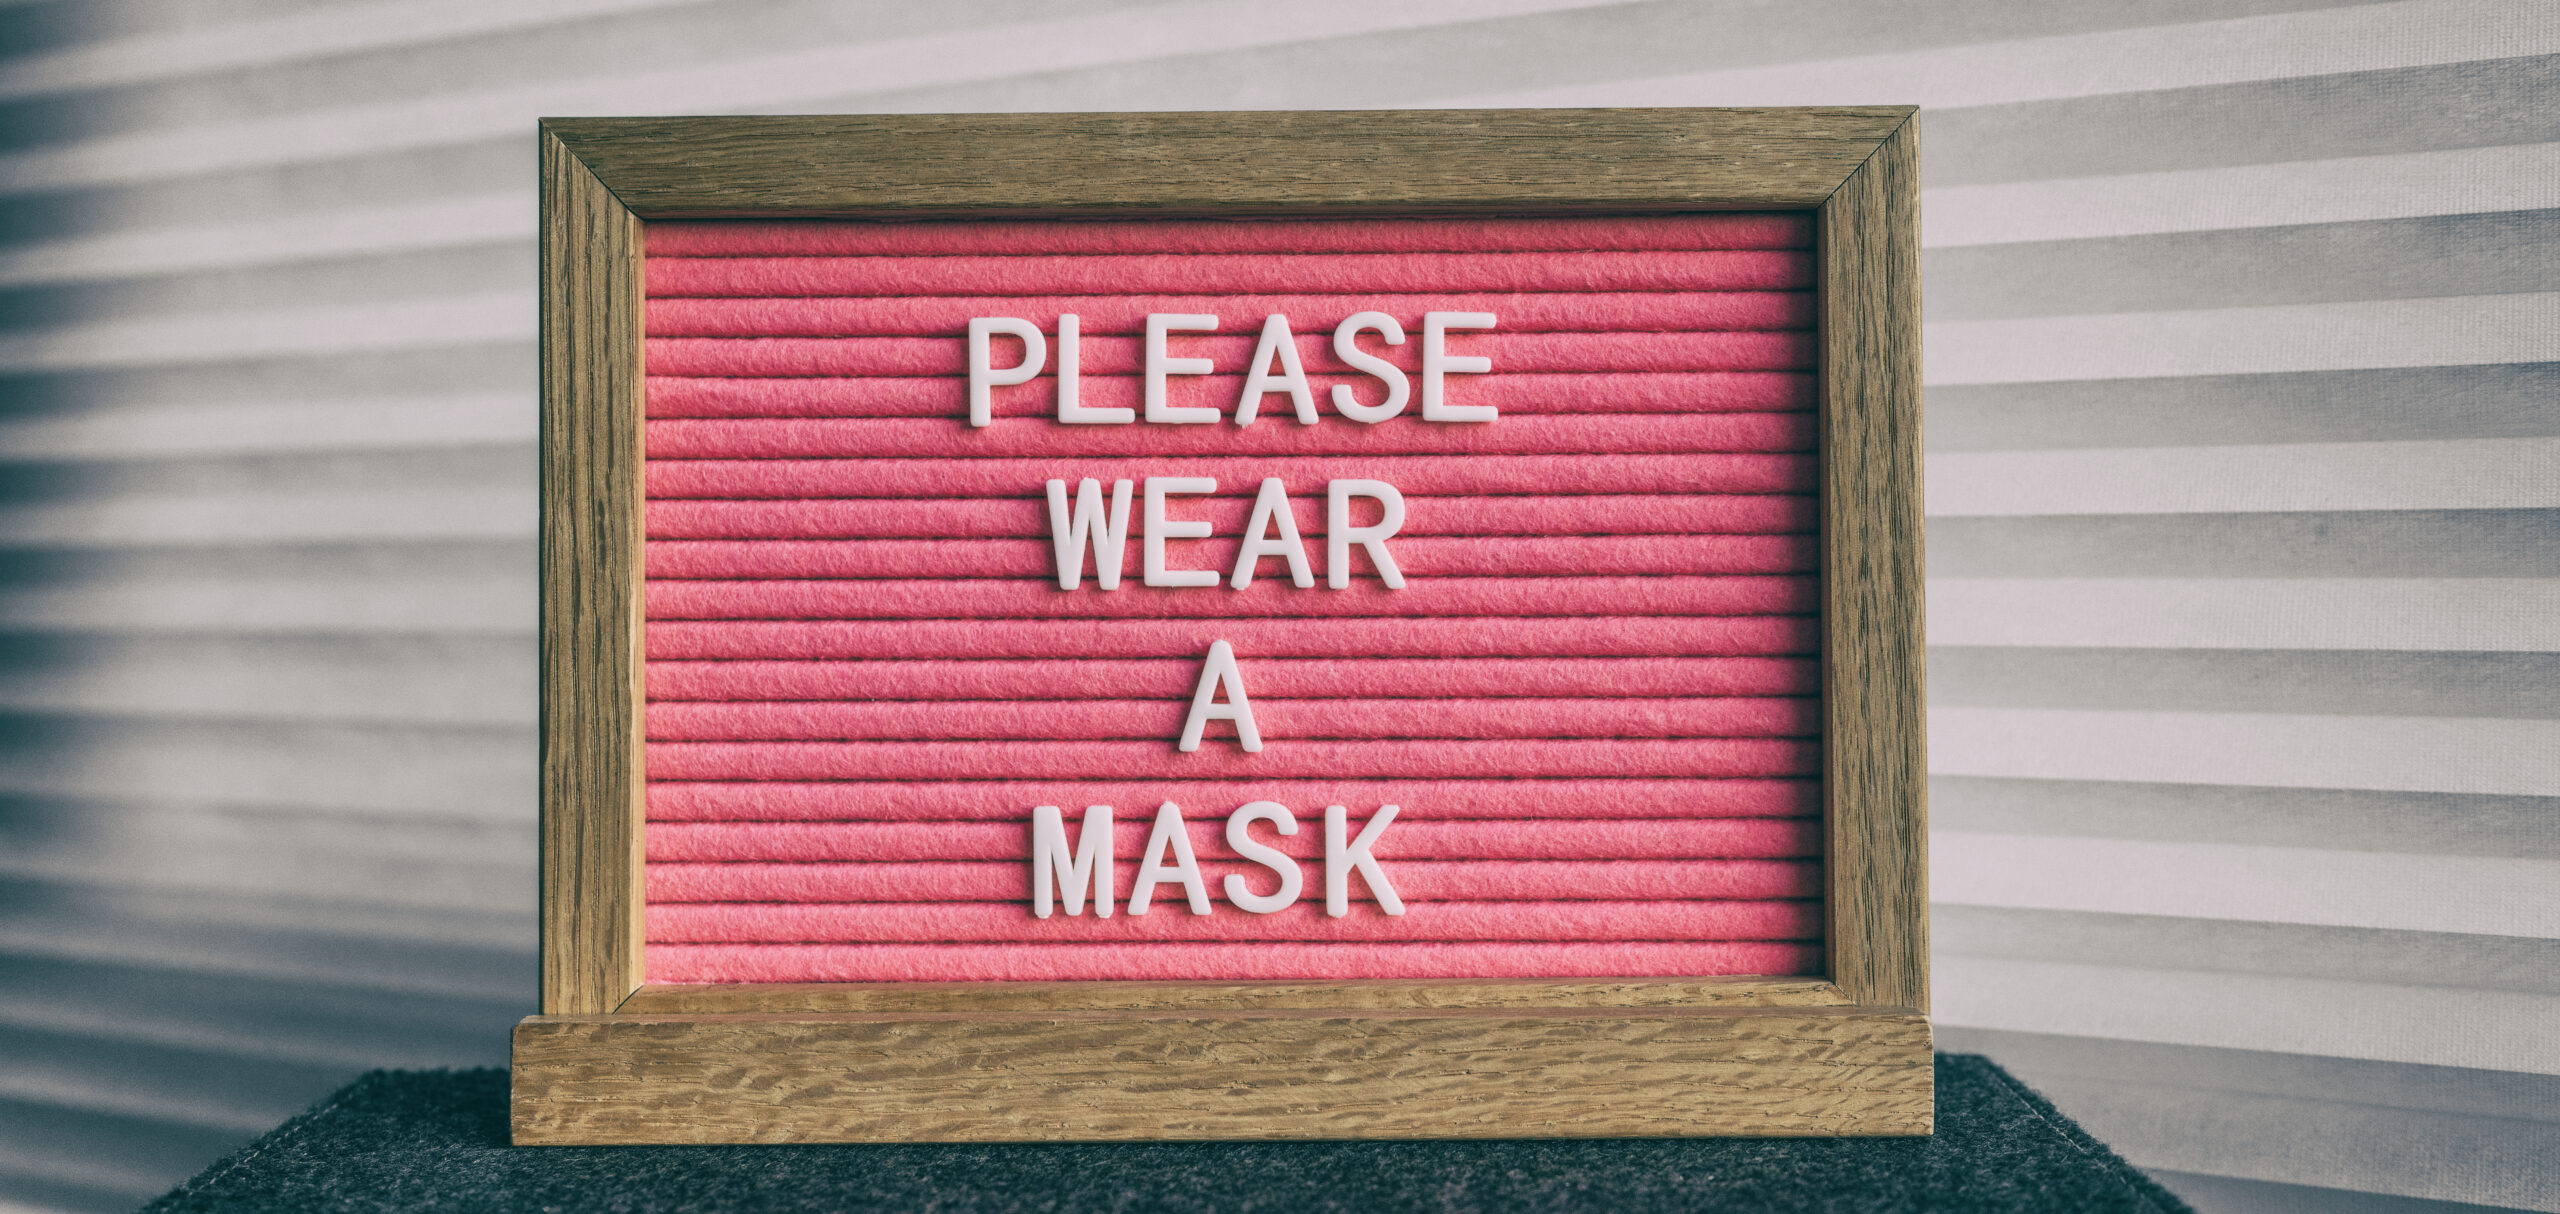 Please wear a mask pink sign at business store entrance message. Obligatory wearing of COVID-19 protection face cover.